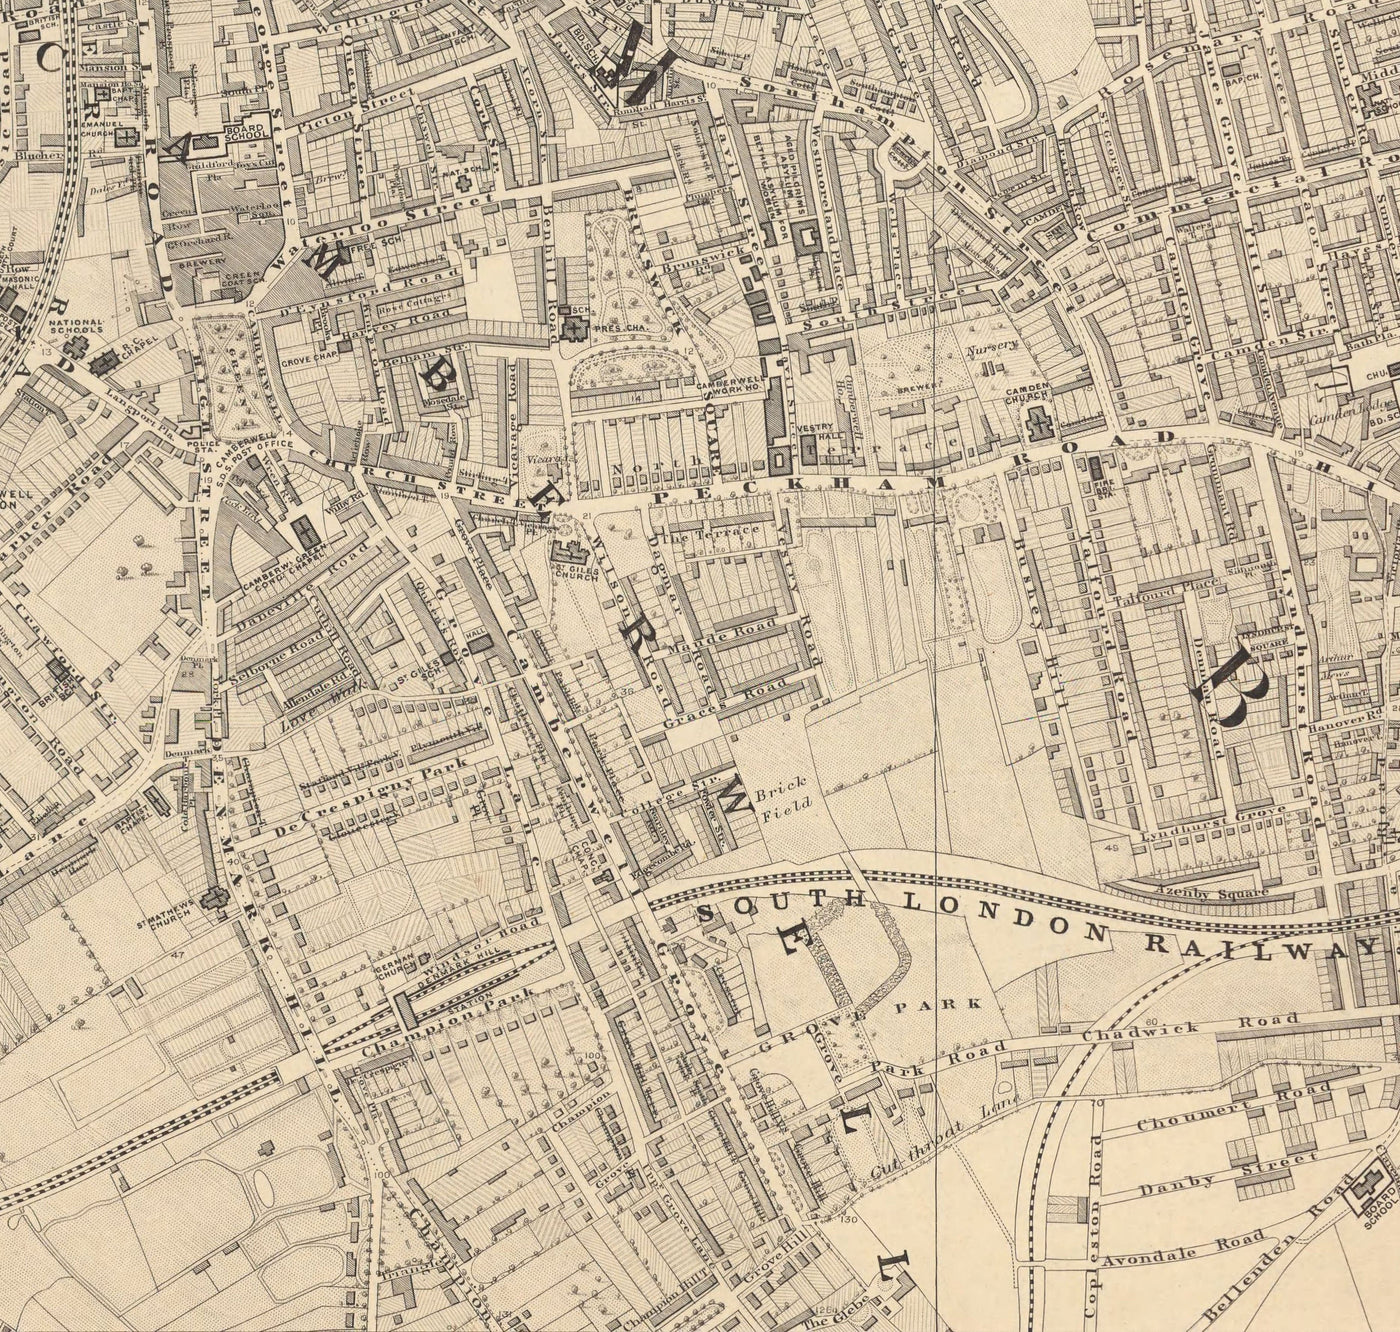 Old Map of South London by Edward Stanford, 1862-Camberwell, Peckham, Walworth, Nunhead, Old Kent Road-SE5, SE17, SE15, SE1, SE16